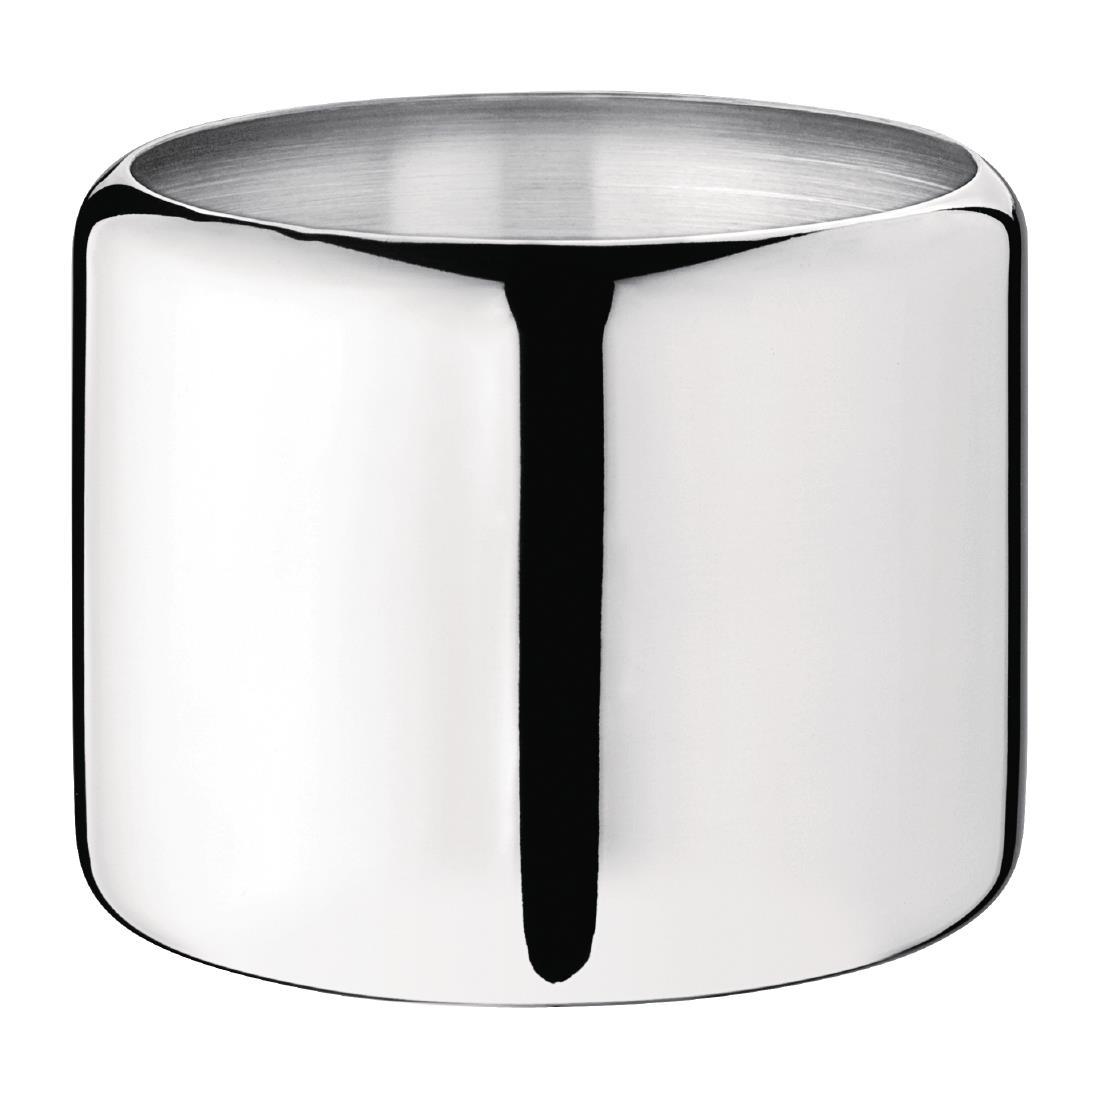 Olympia Concorde Stainless Steel Sugar Bowl 84mm - J729  - 1